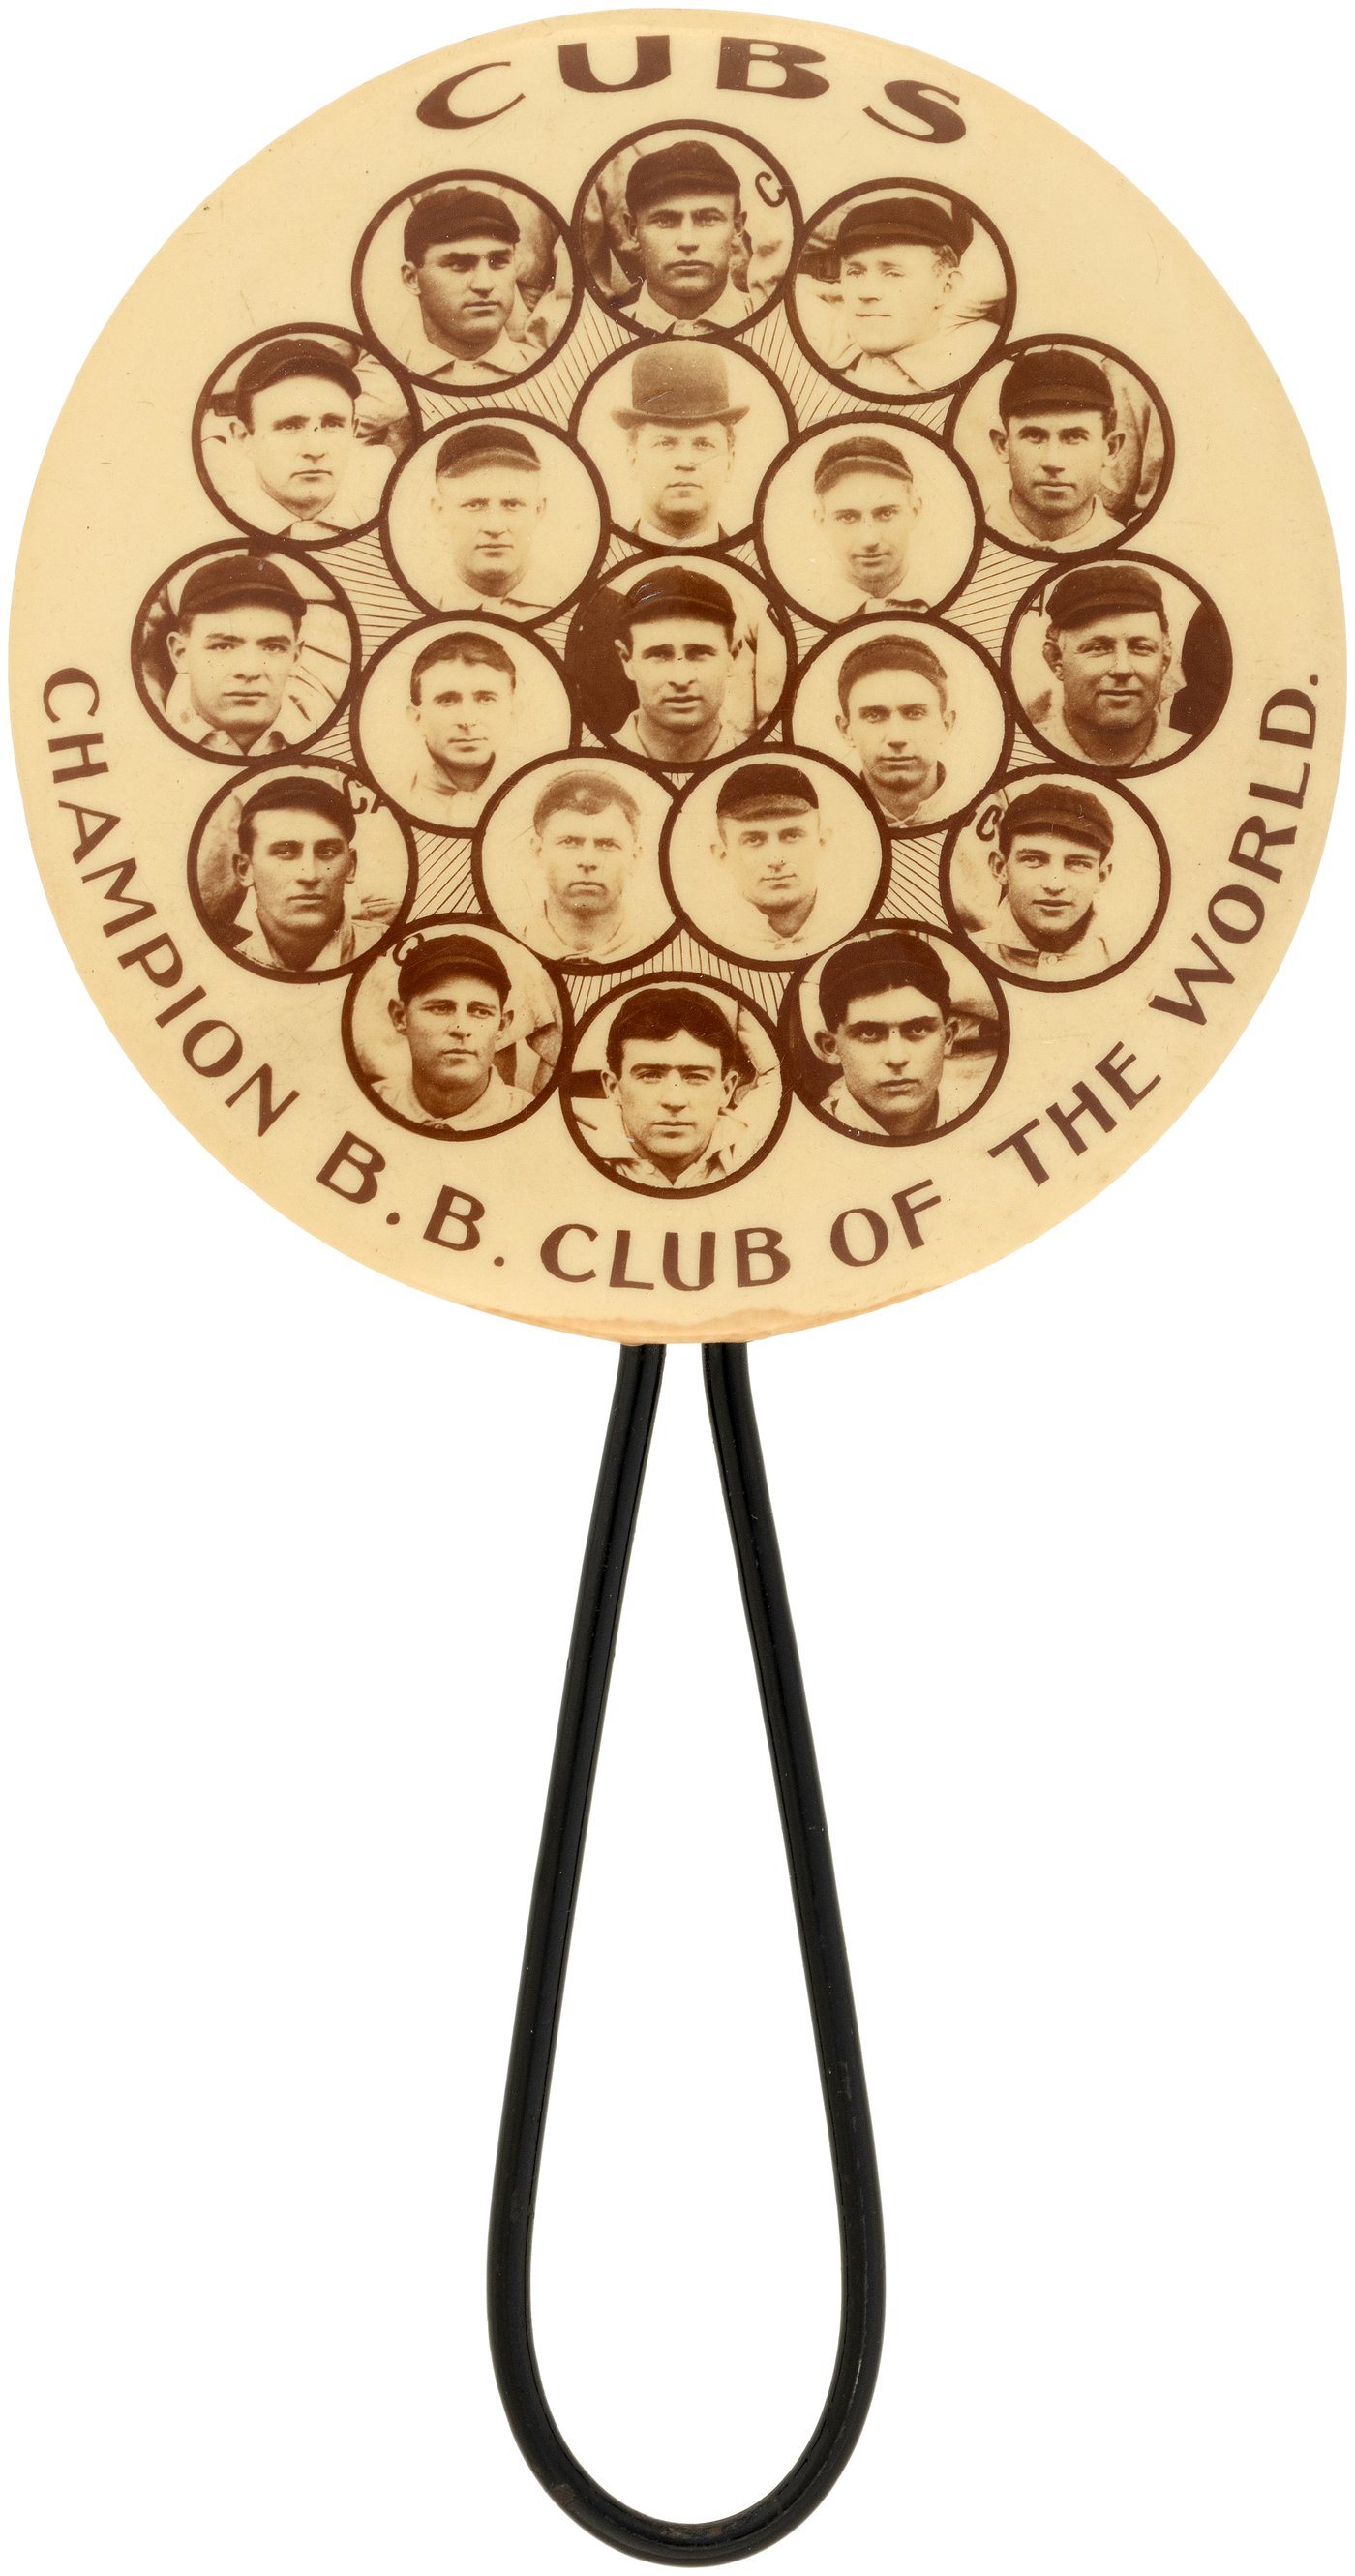 Hake's - 1906 CHICAGO CUBS CHAMPION B.B. CLUB OF THE WORLD HANDLED MIRROR  W/FOUR HALL OF FAMERS.